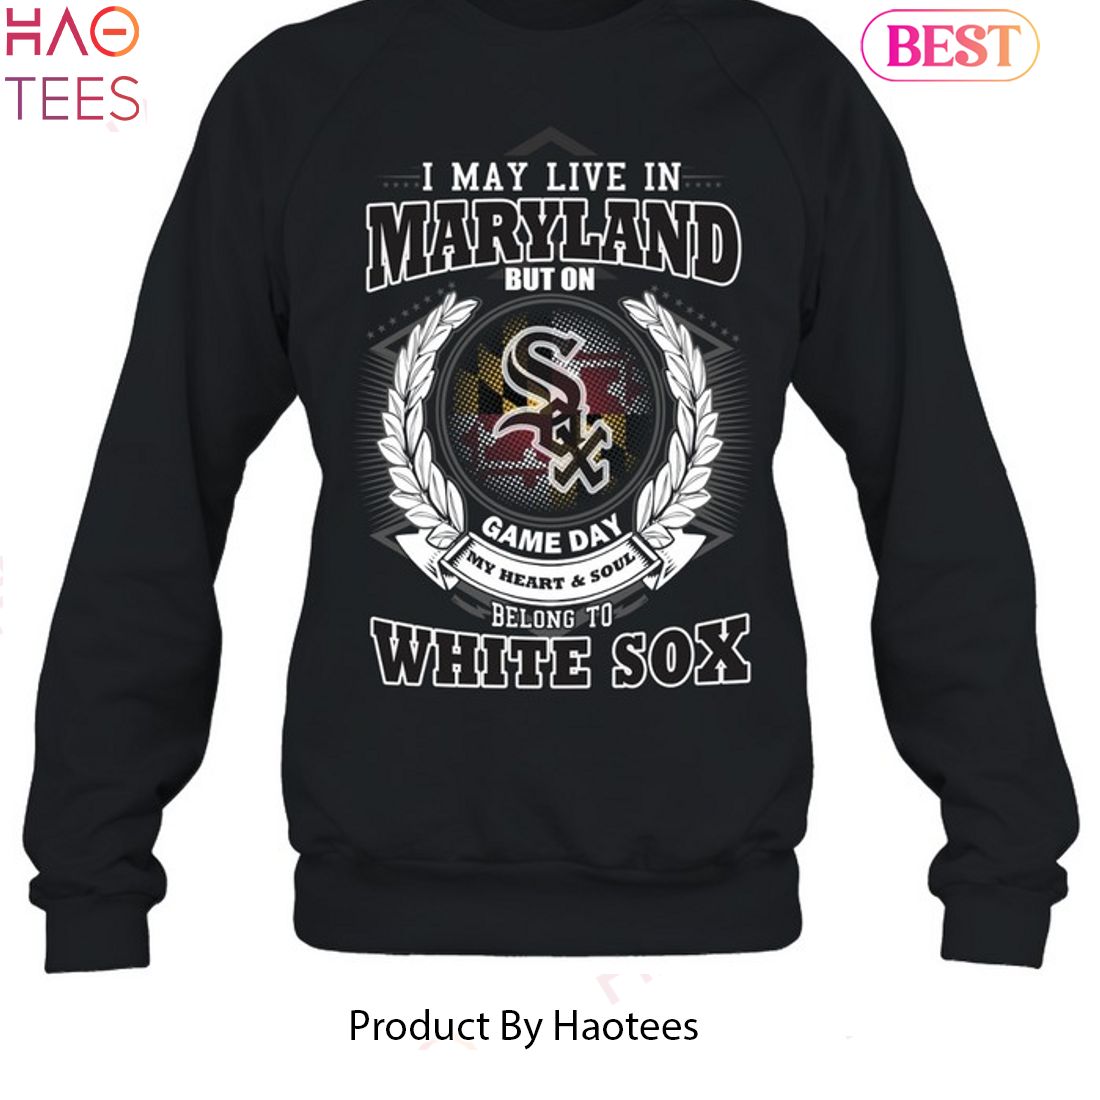 Official i may live in Maryland be long to chicago white sox shirt, hoodie,  sweatshirt for men and women